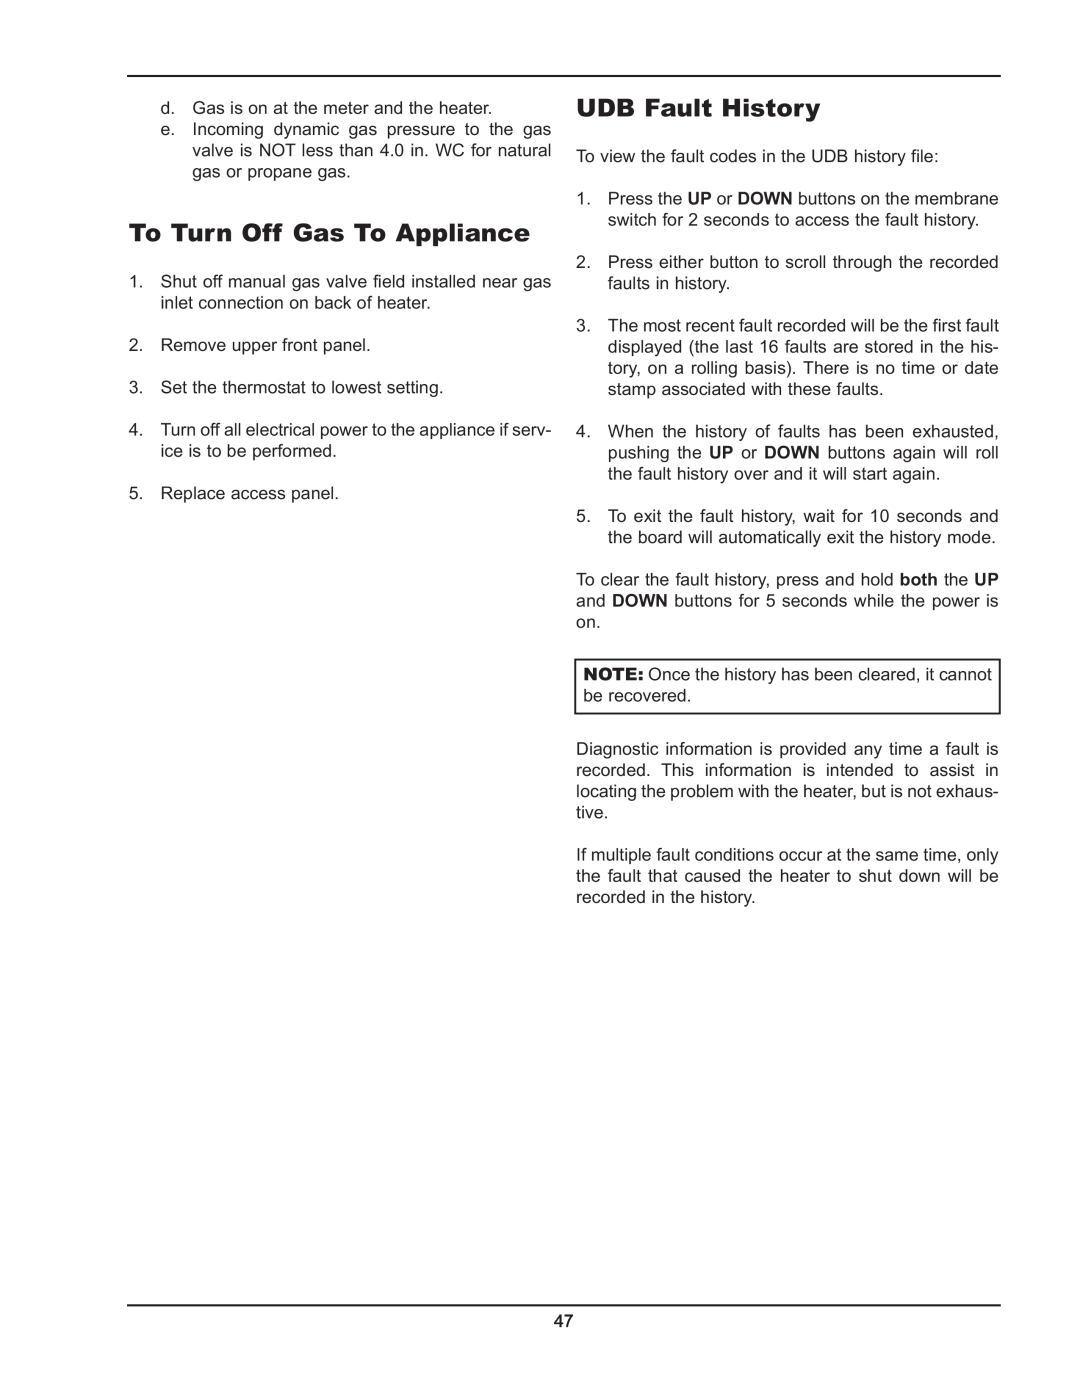 Raypak 5042004 operating instructions To Turn Off Gas To Appliance, UDB Fault History 